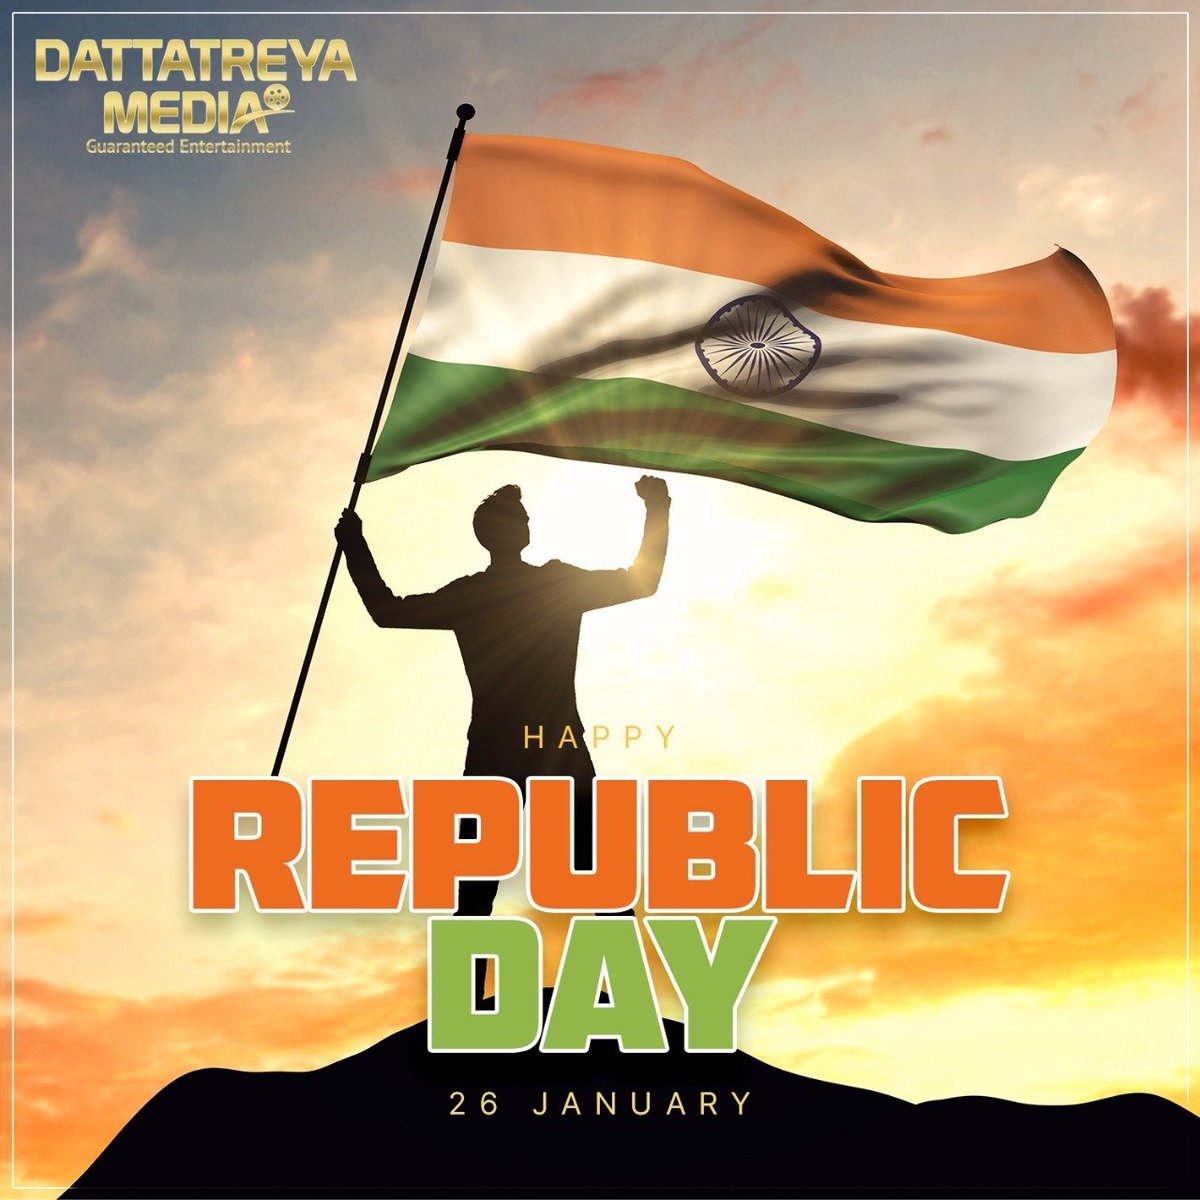 Salutes and tributes to our freedom heroes, Let’s celebrate this holy occasion with more prosperity and greatness. Happy Republic Day!🇮🇳💝 . . #republicday #india #republicdayindia #happyrepublicday #indian #January26th #indianarmy #republicdayparade #RepublicDaycelebration